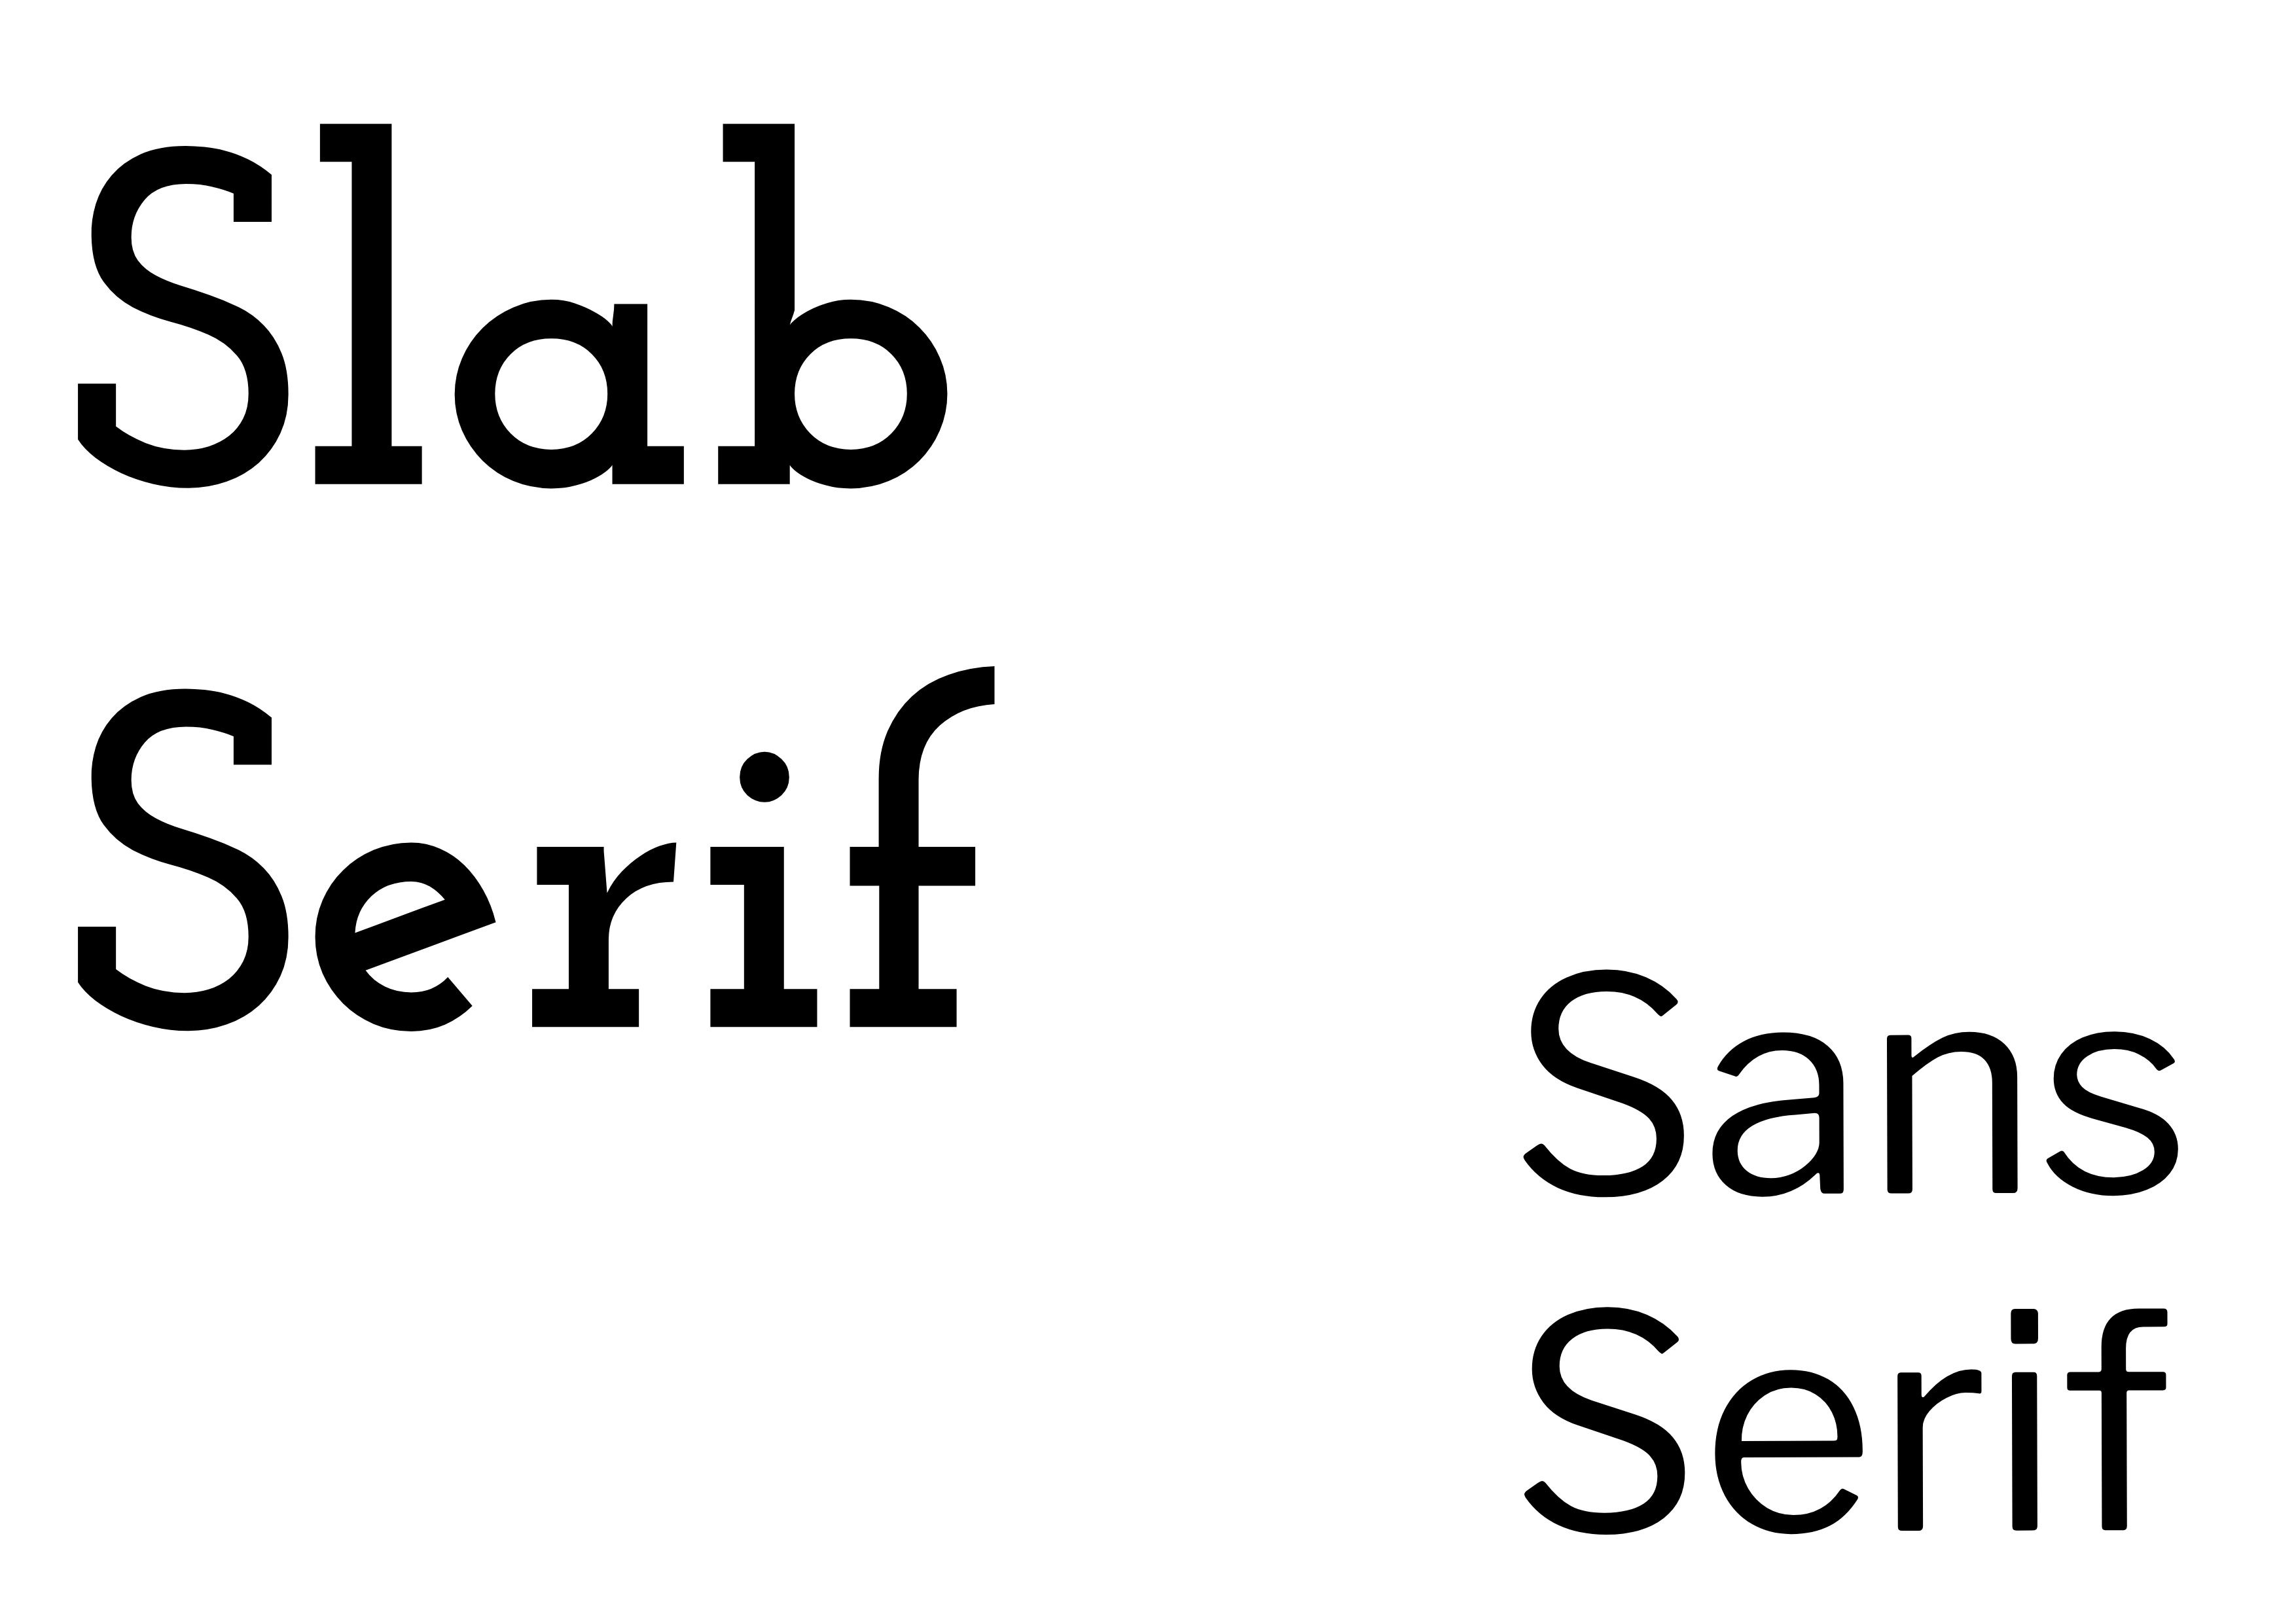 Font Pairing - 'Slab Serif' in bold black to the left with 'Sans Serif' in black, smaller to the right - The complete guide to fonts: 5 essential types of fonts in typography - Image